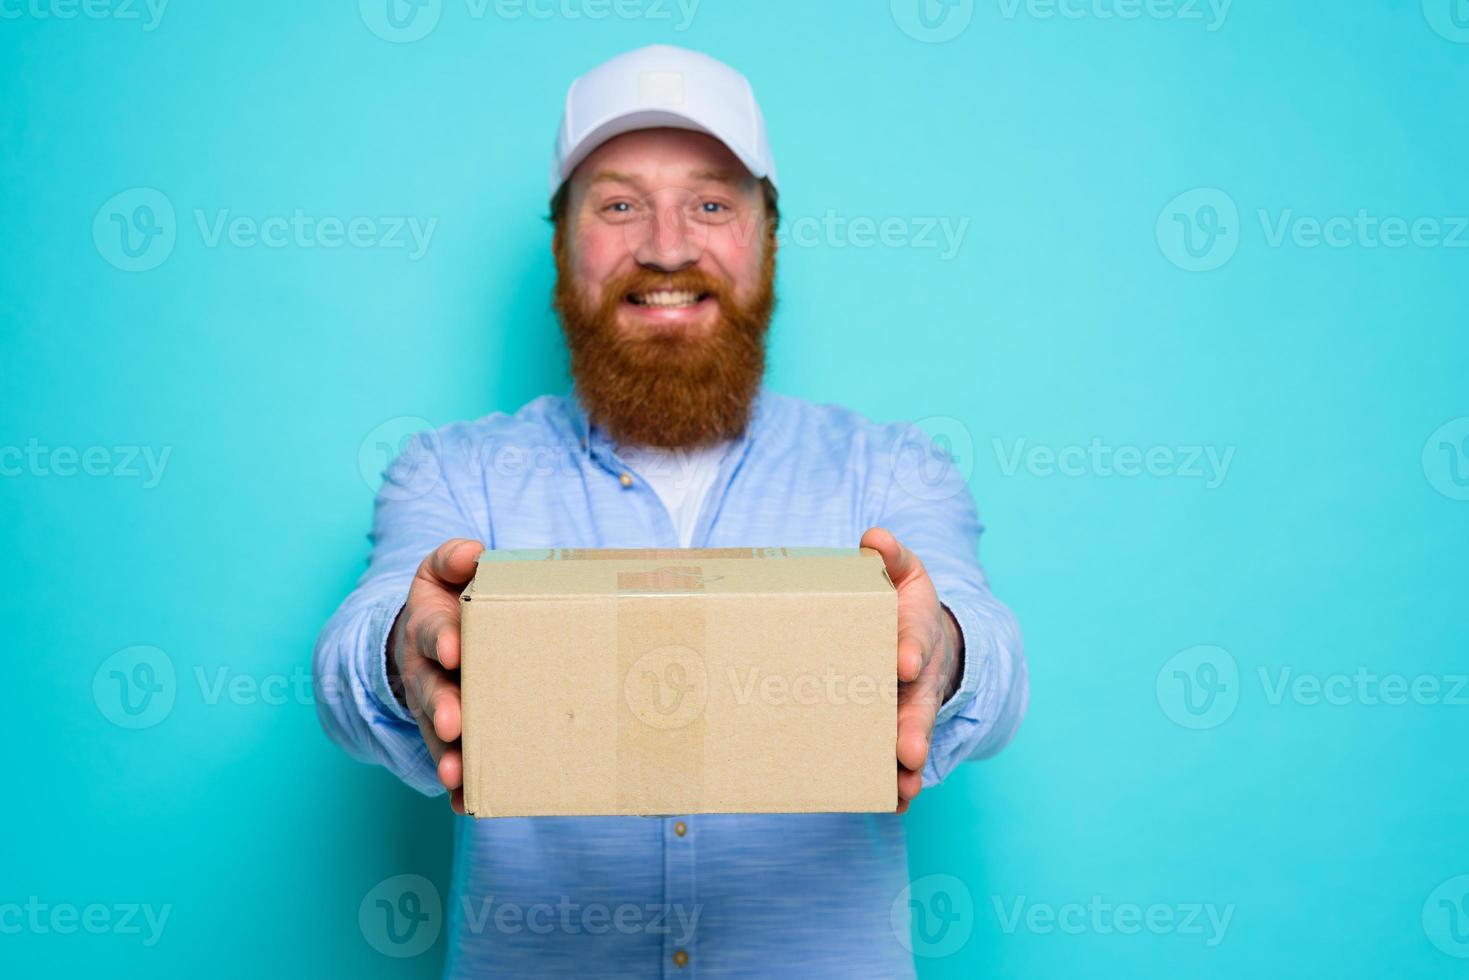 Courier with hat is happy to deliver a carton box photo